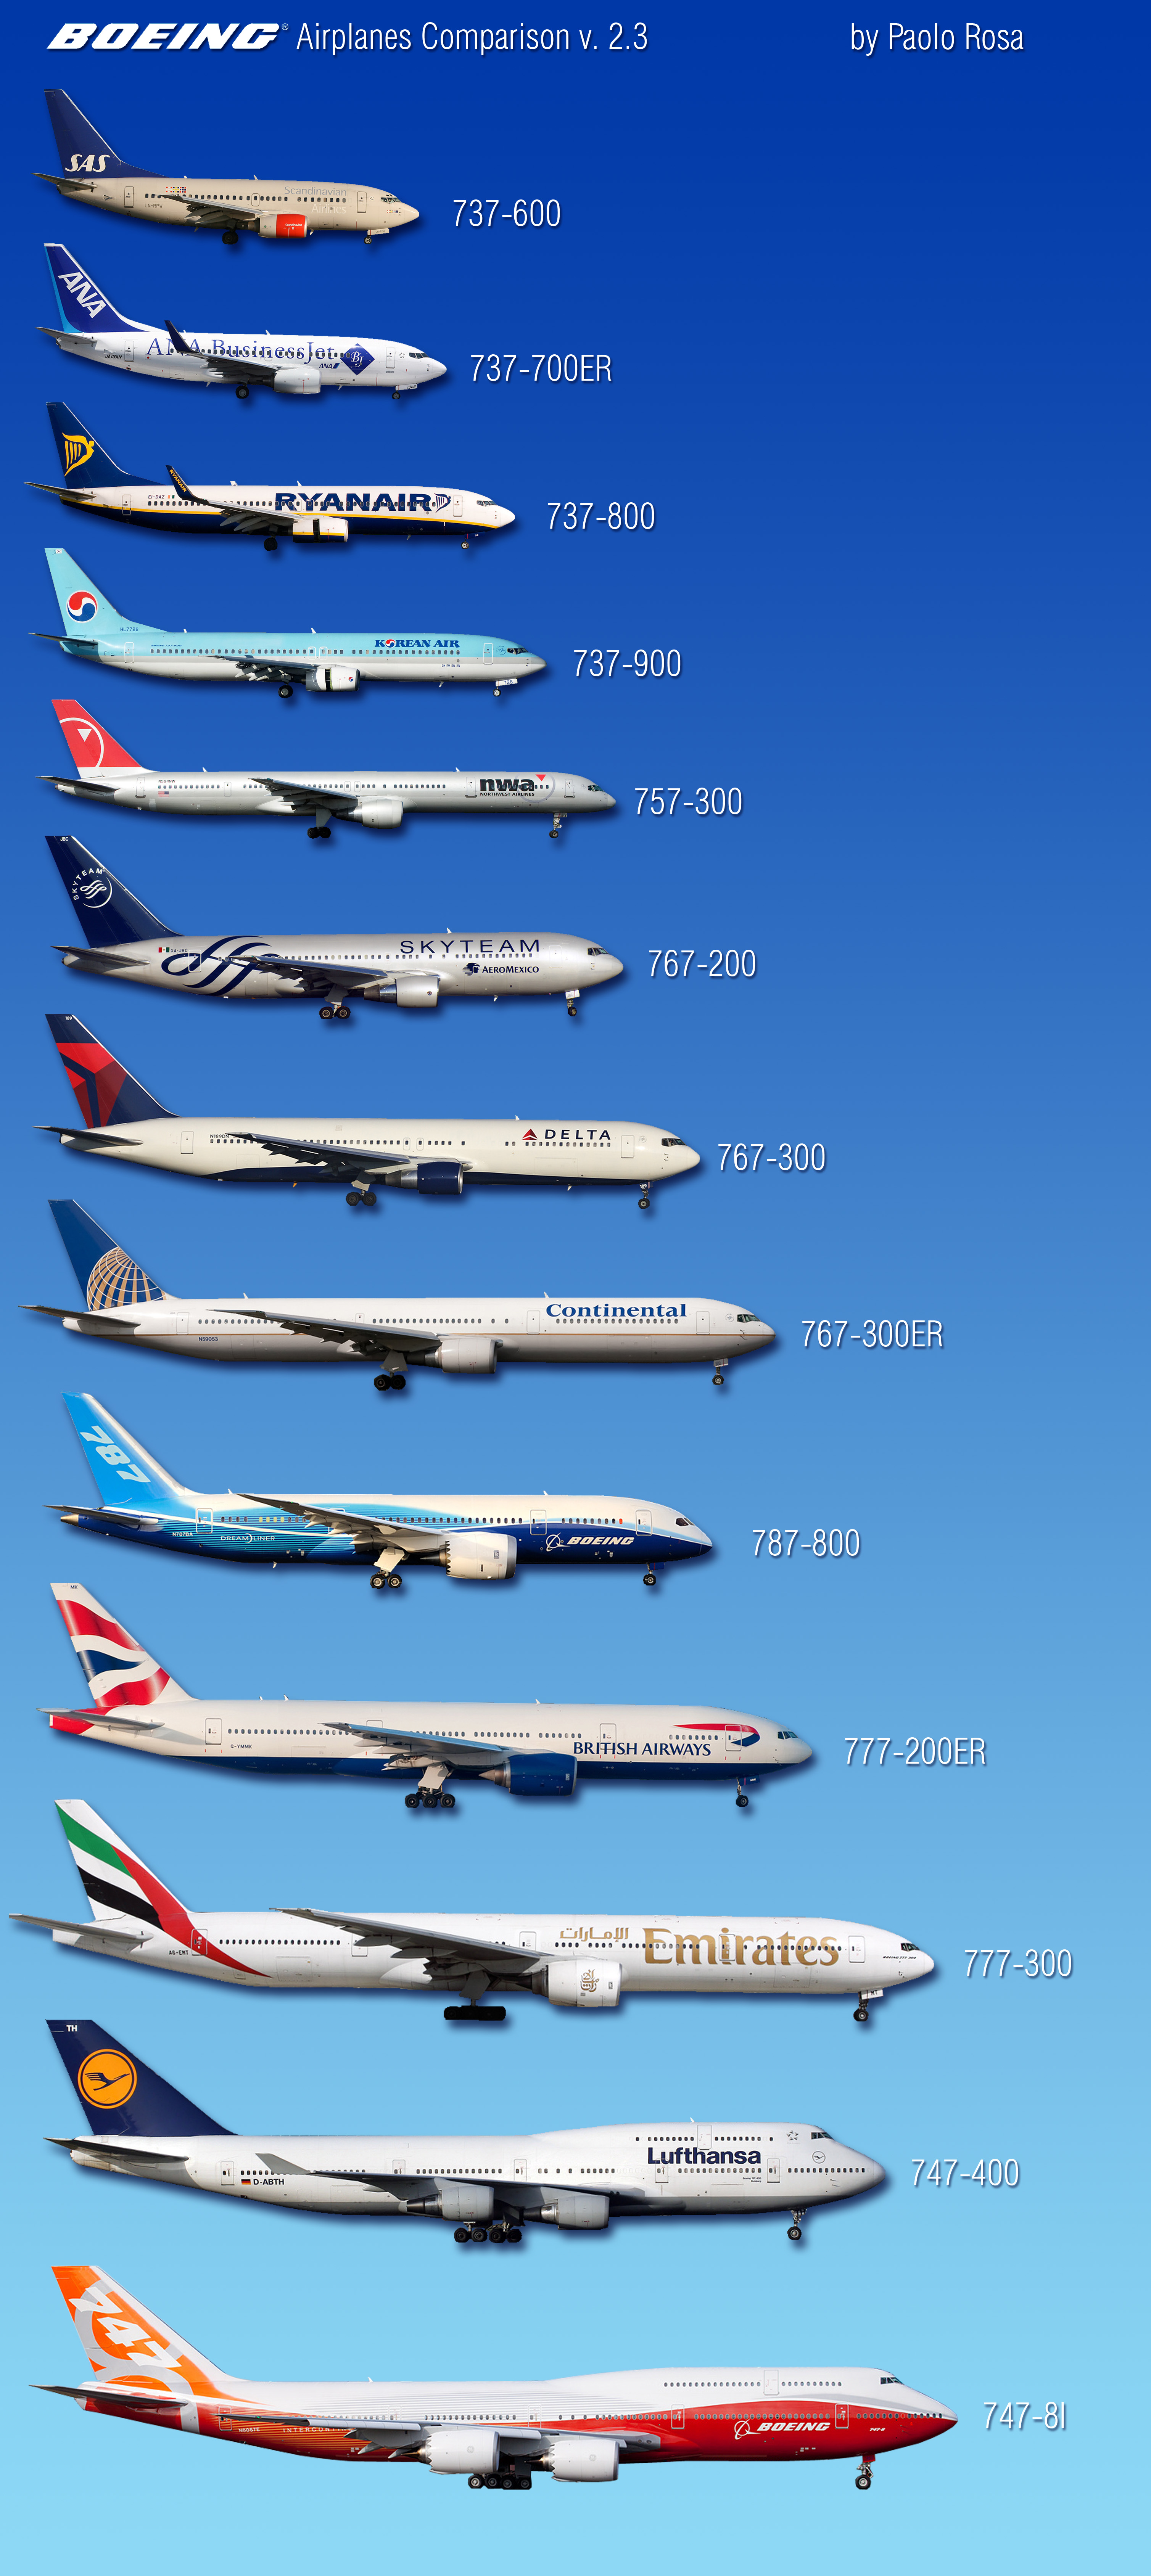 Boeing Airplanes Comparison v. 2.3 | Flickr - Photo Sharing!